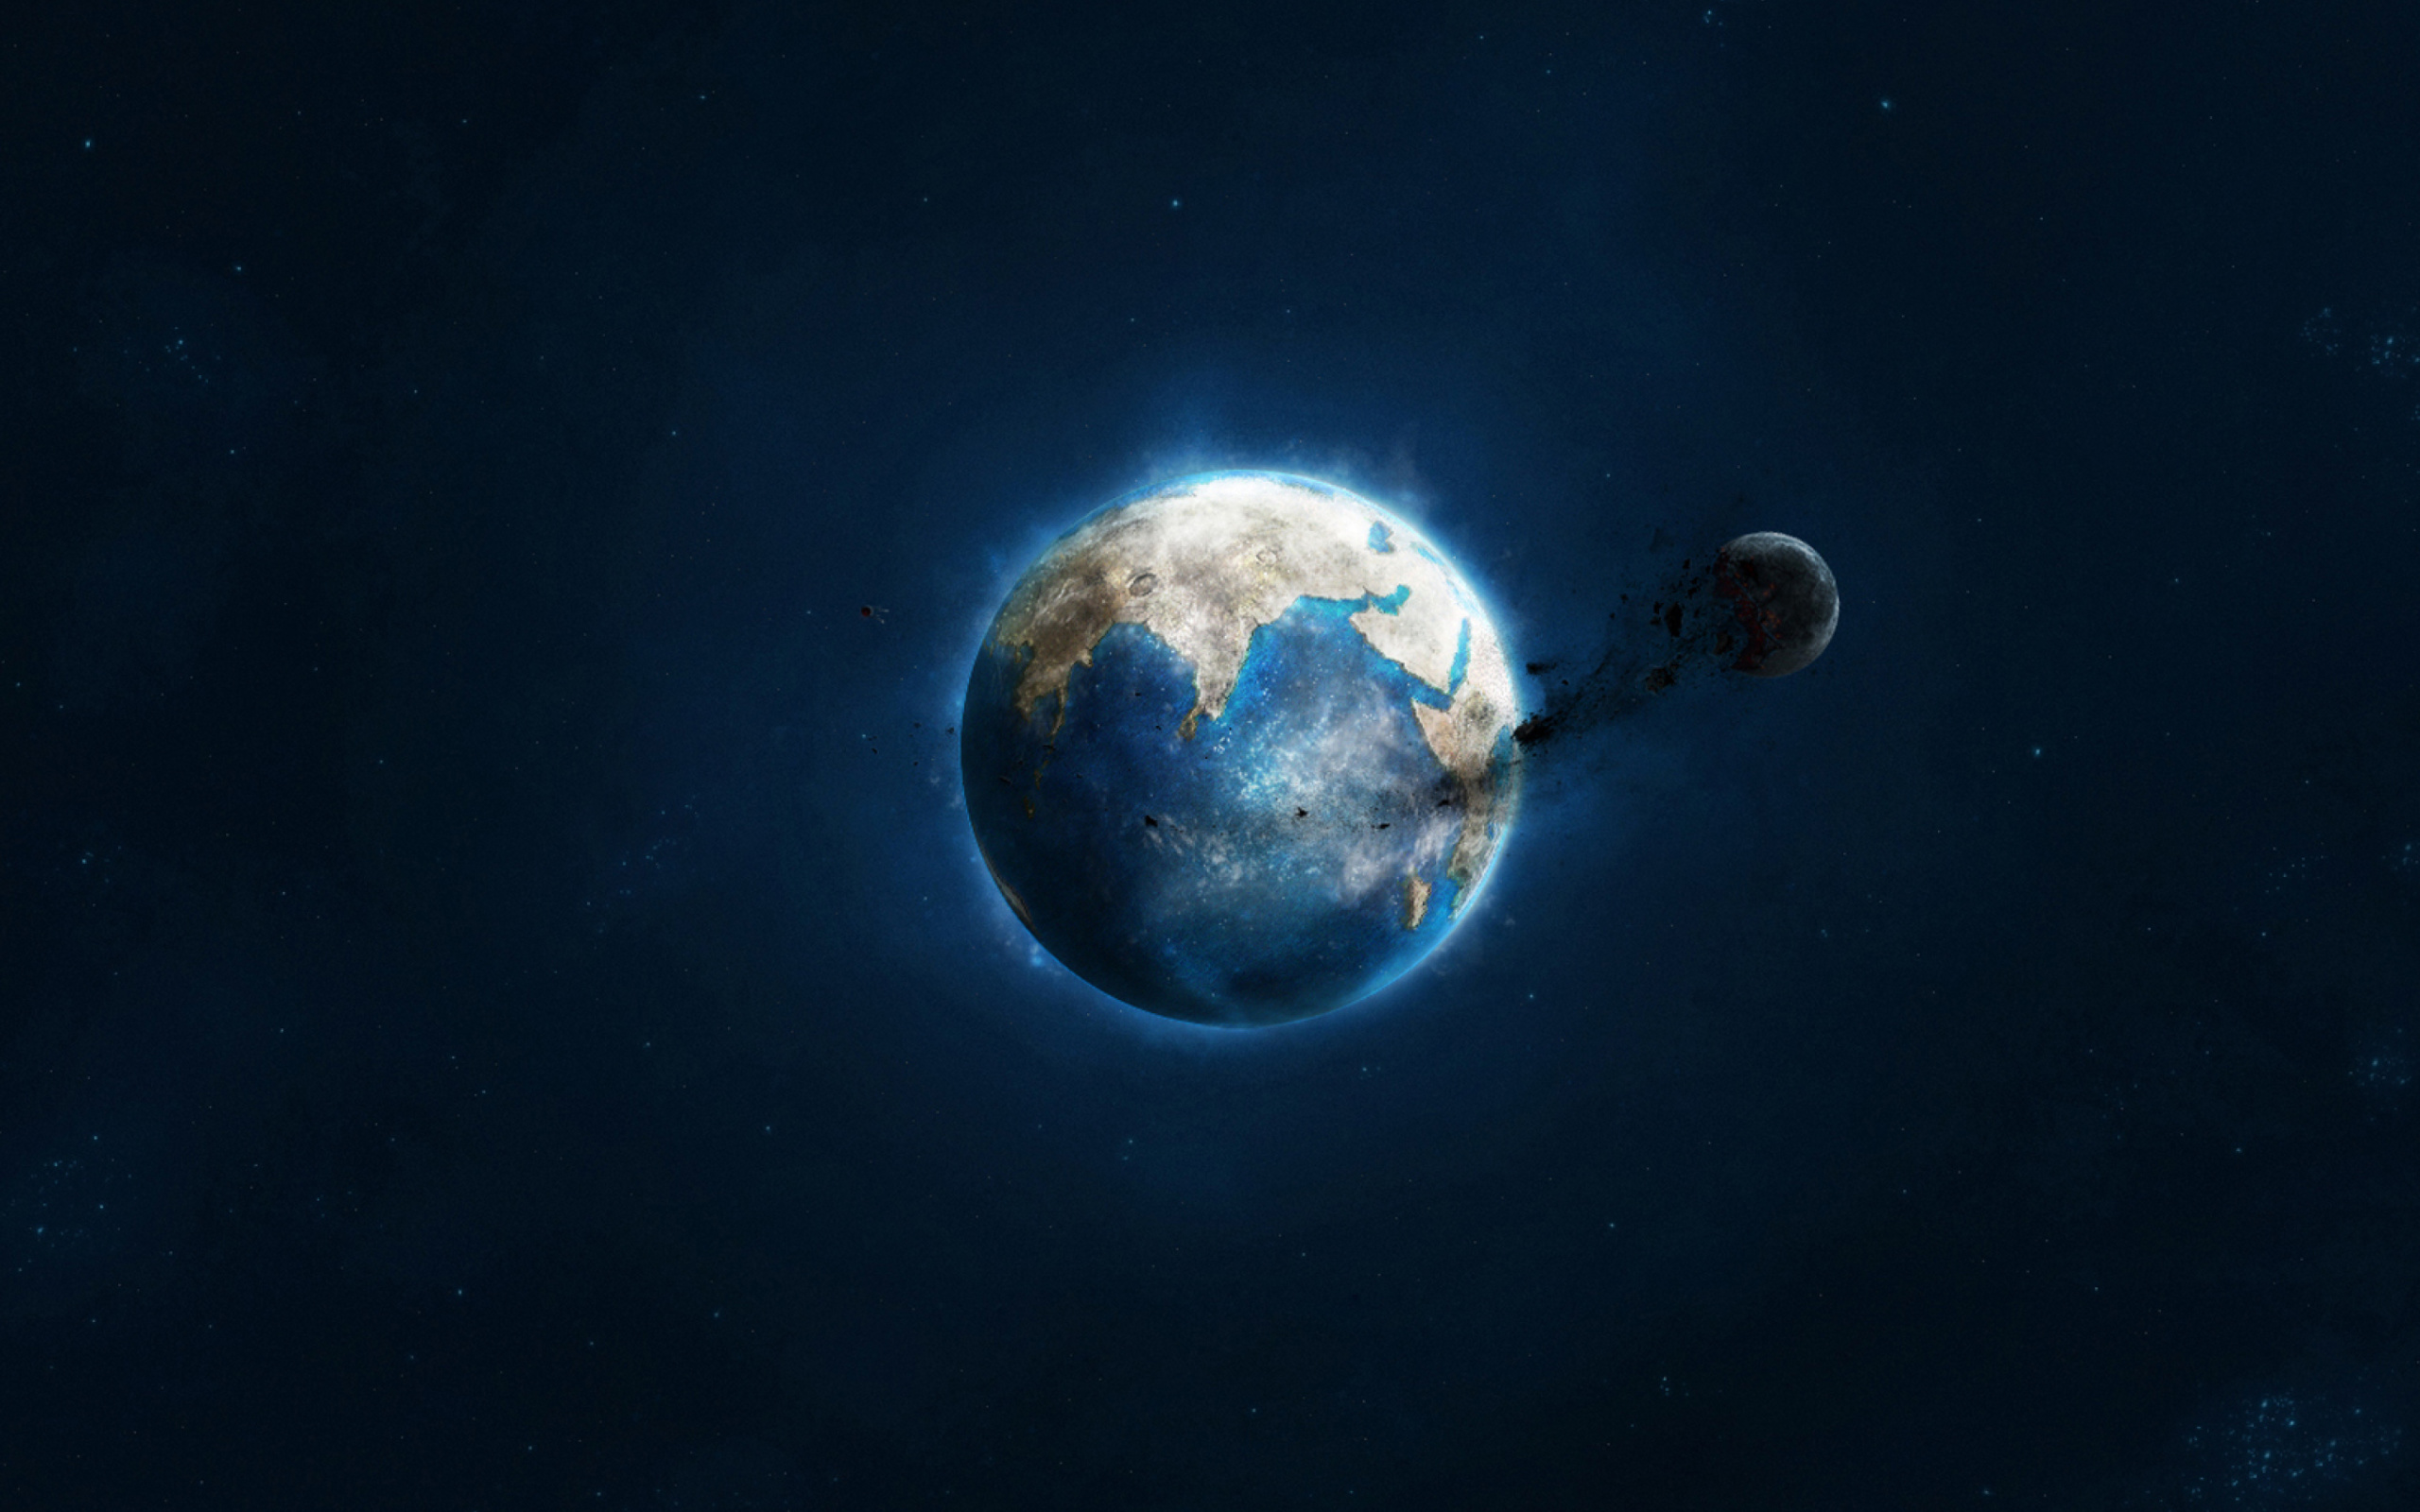 Planet and Asteroid wallpaper 2560x1600